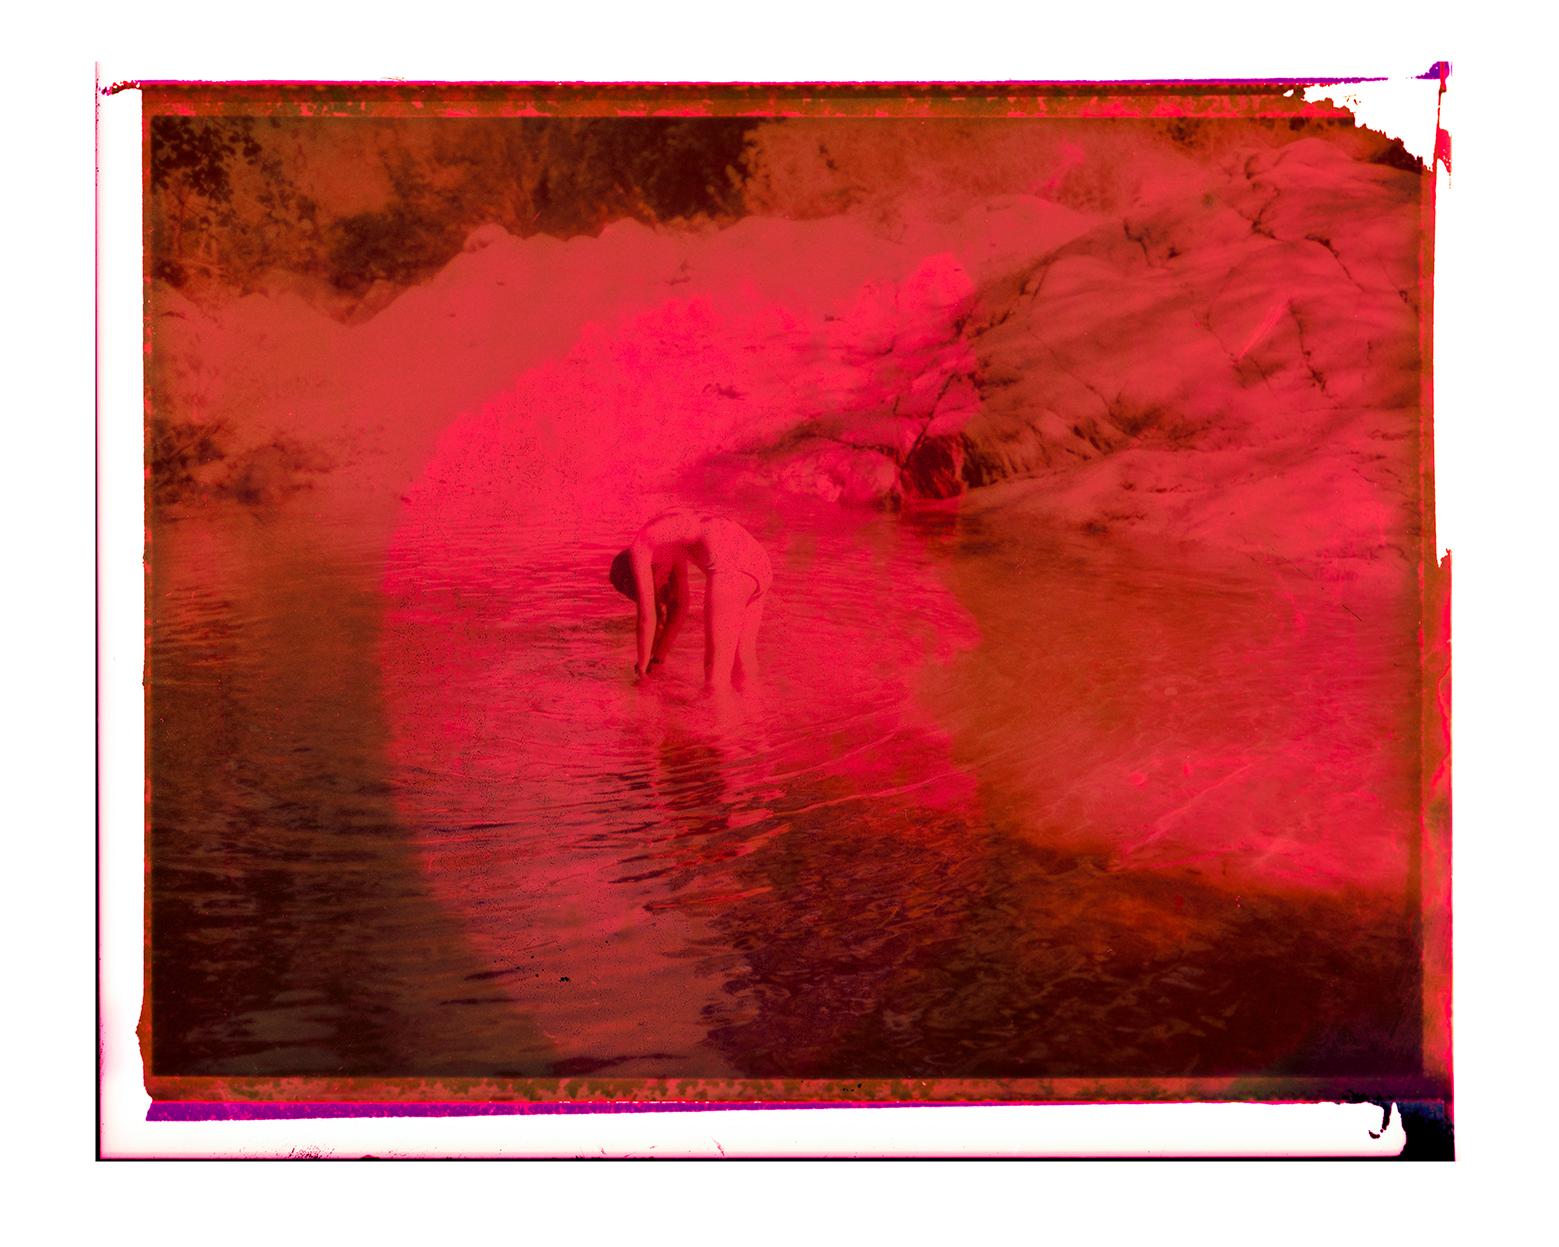 Cristina Fontsare Abstract Photograph - Pink red water (Once) - Contemporary, Polaroid, Photograph, abstract